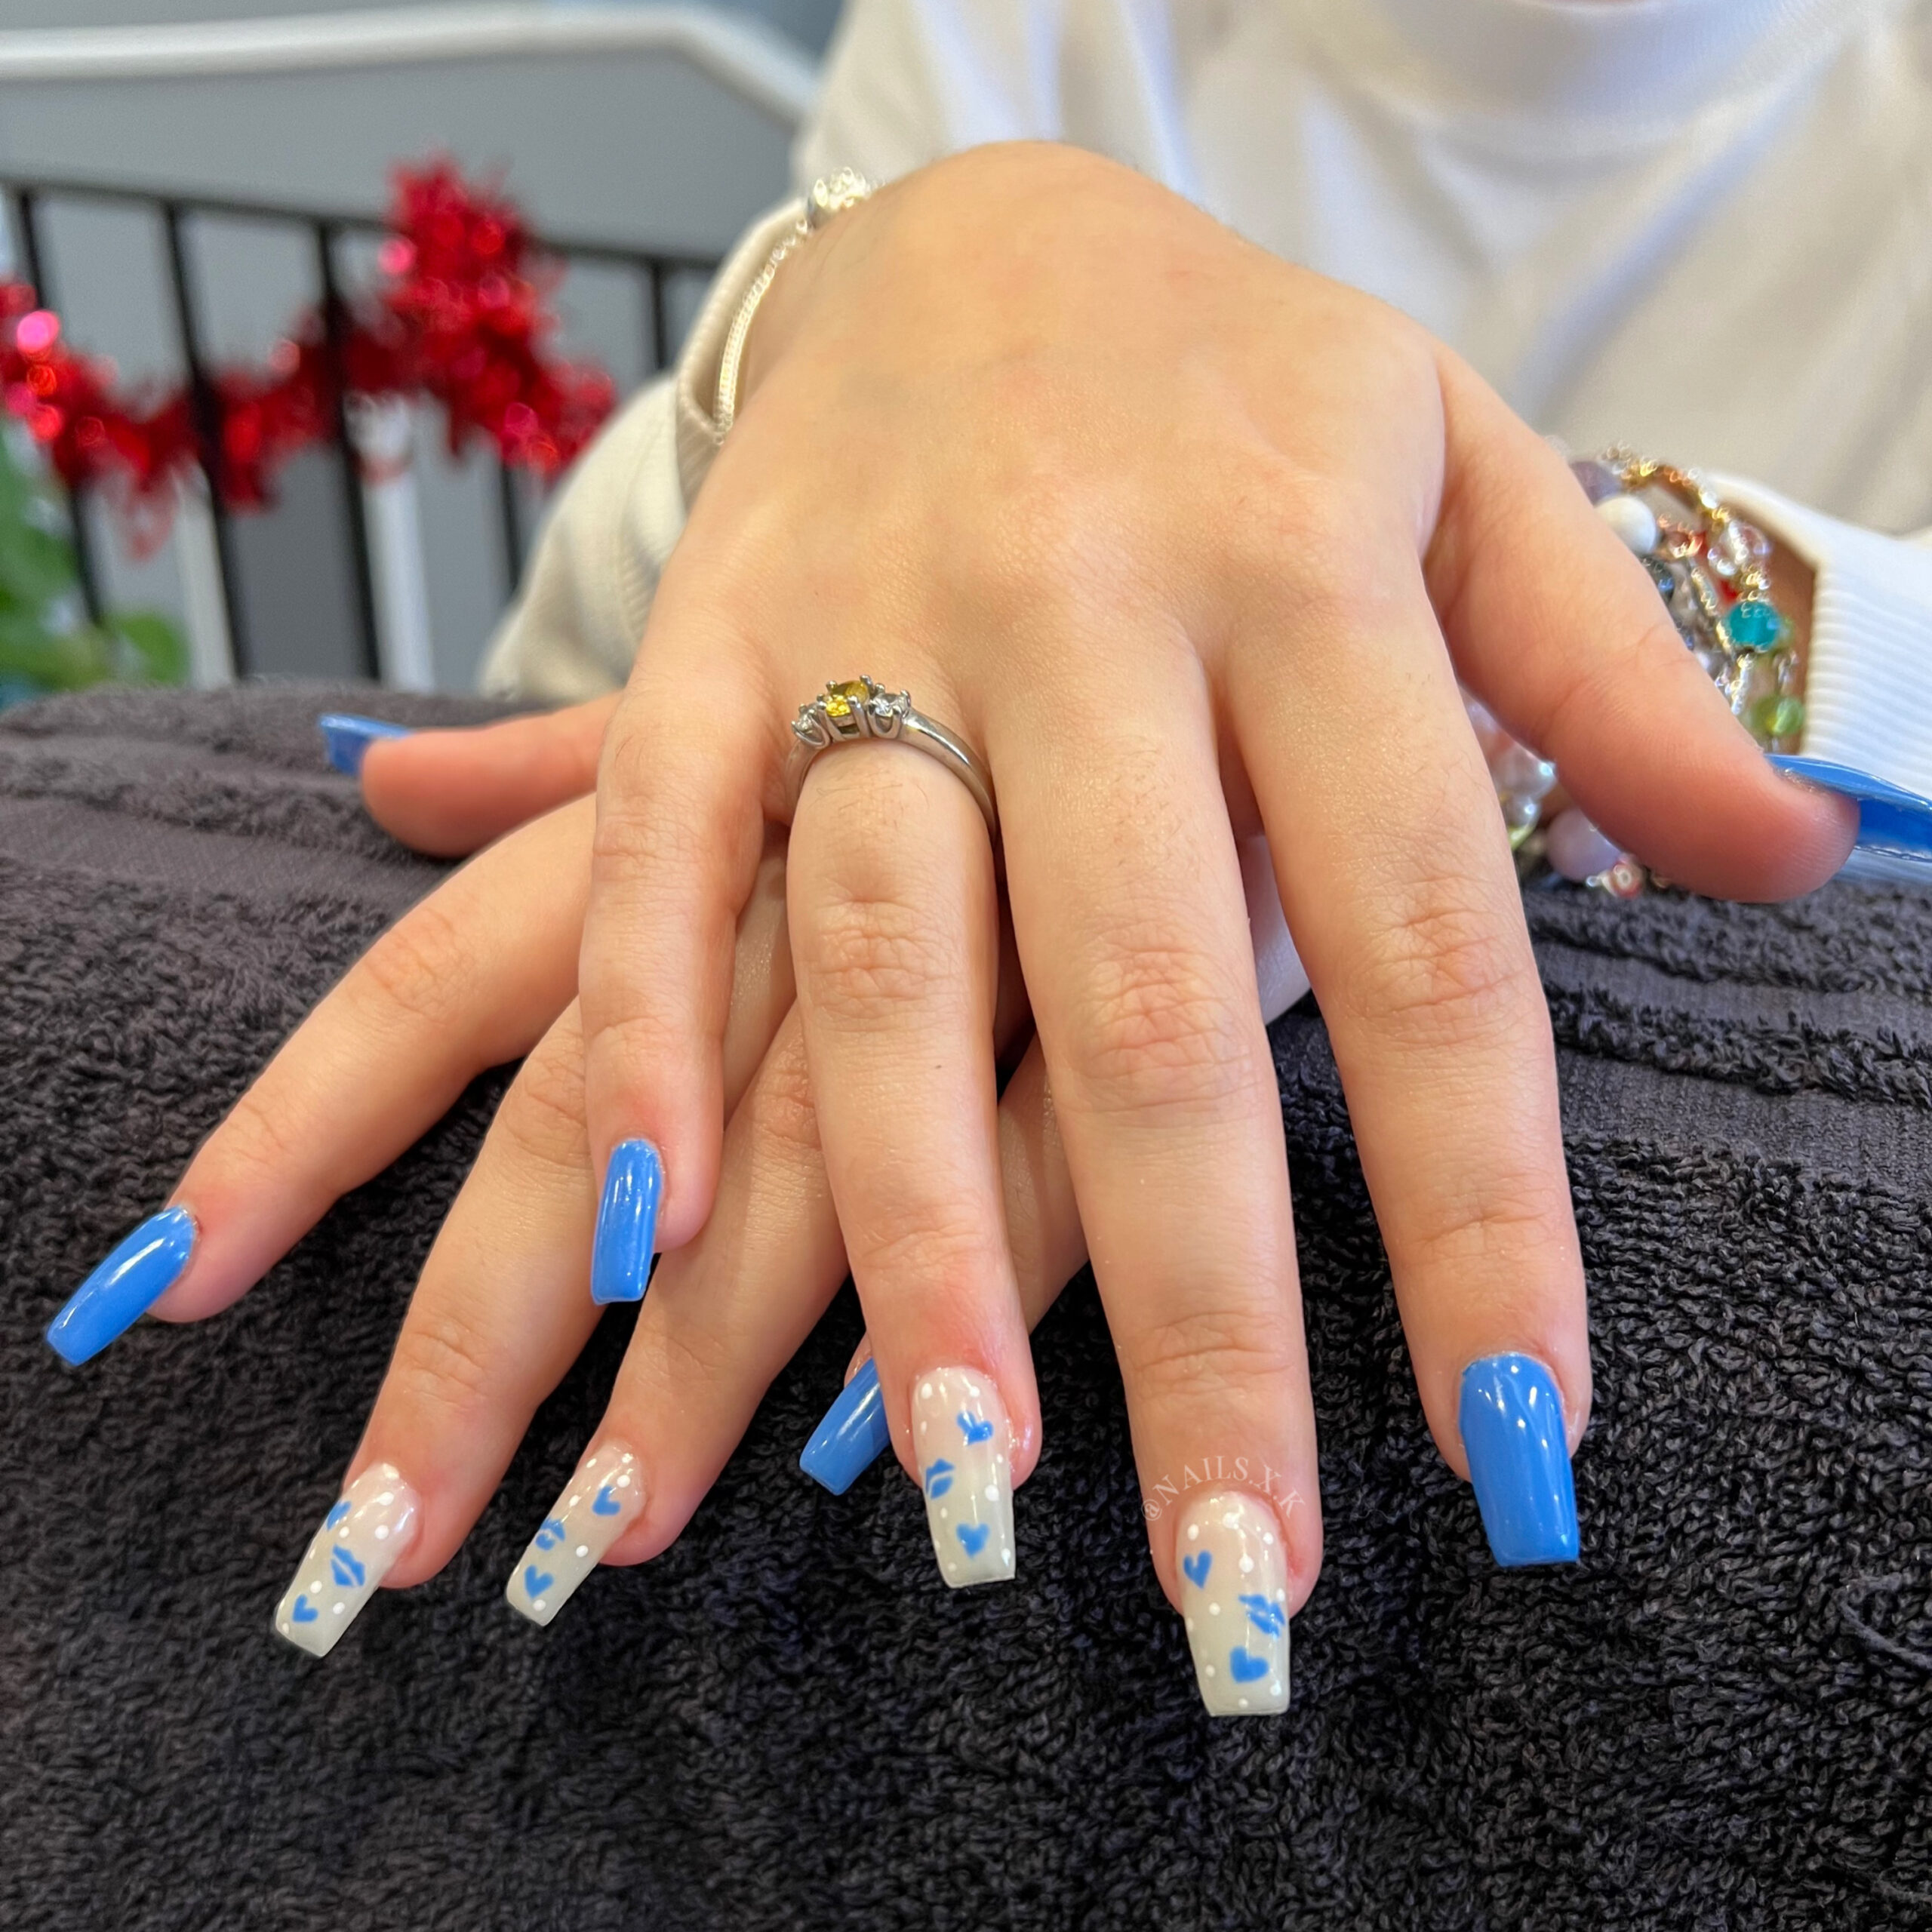 Hard gel full set with bright blue and hand painted hearts and lips. Nails by K